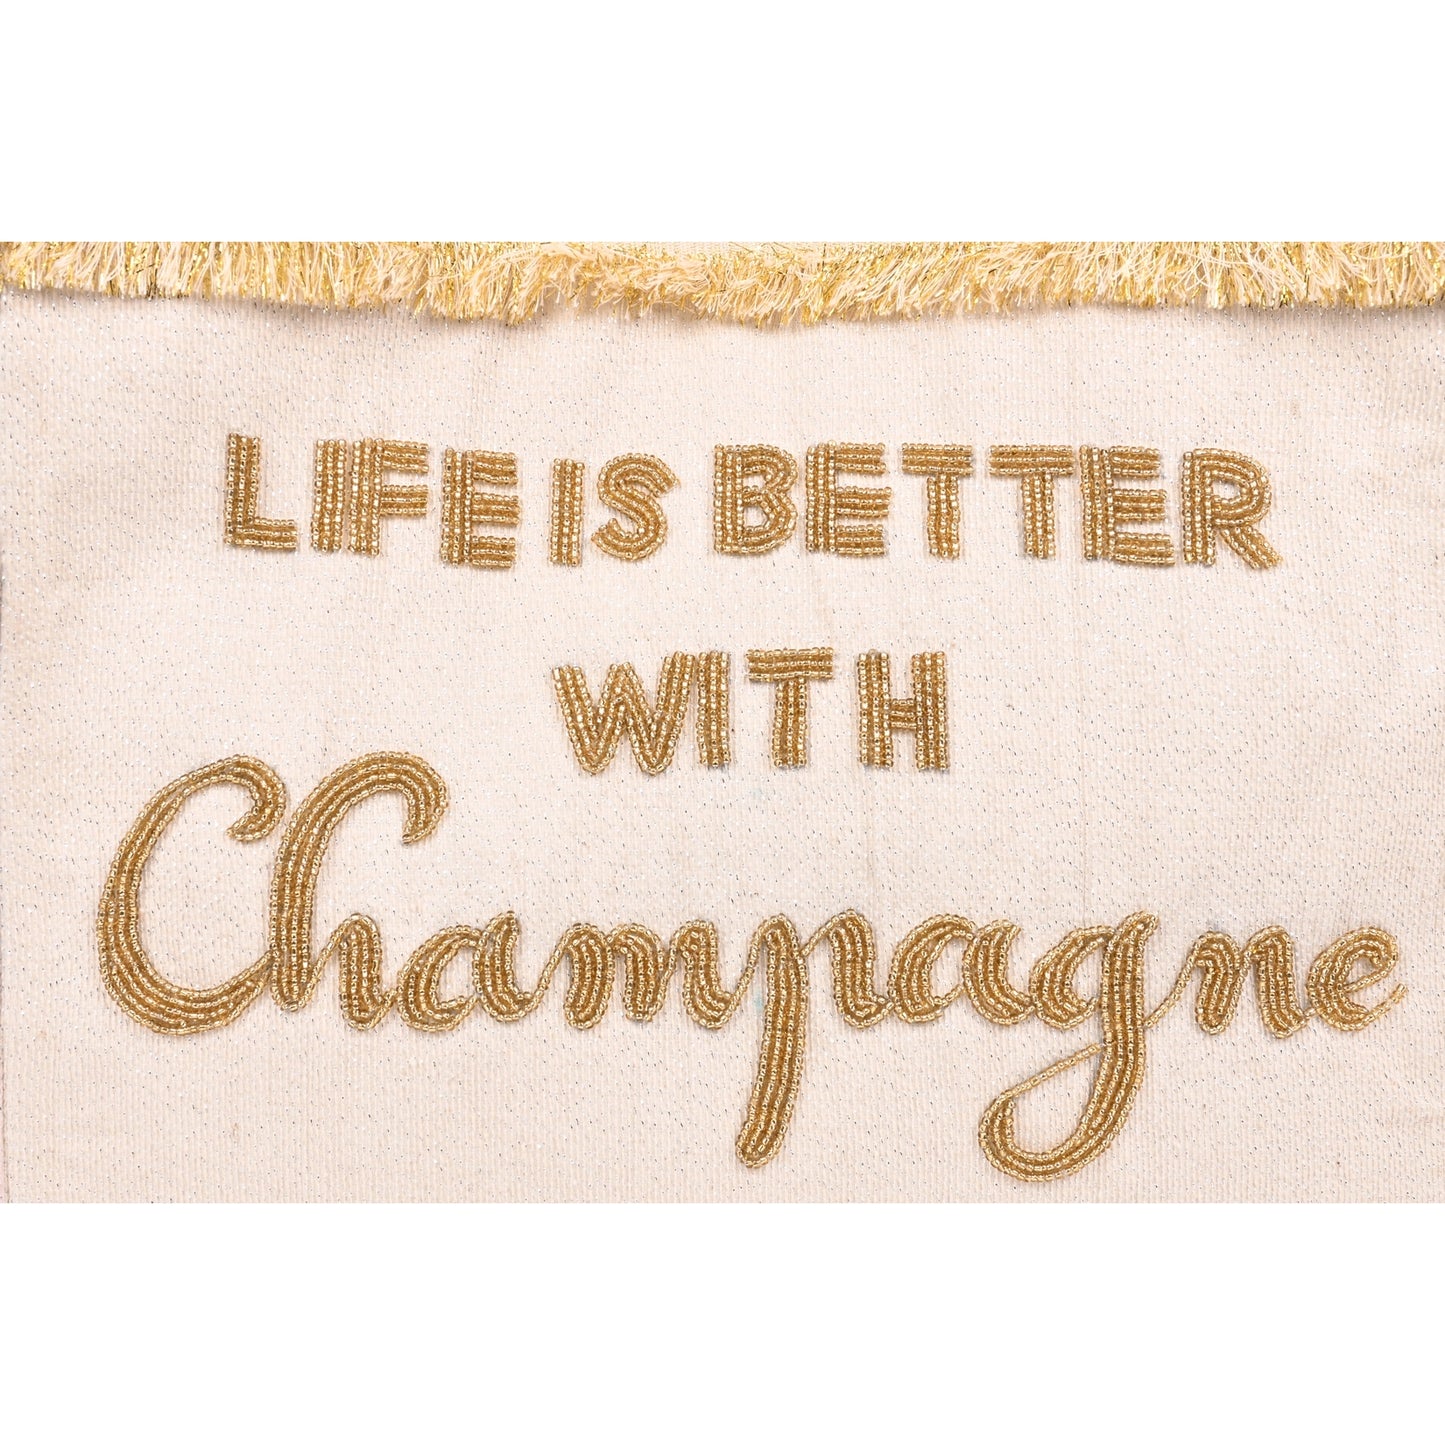 Champagne Forever Tote